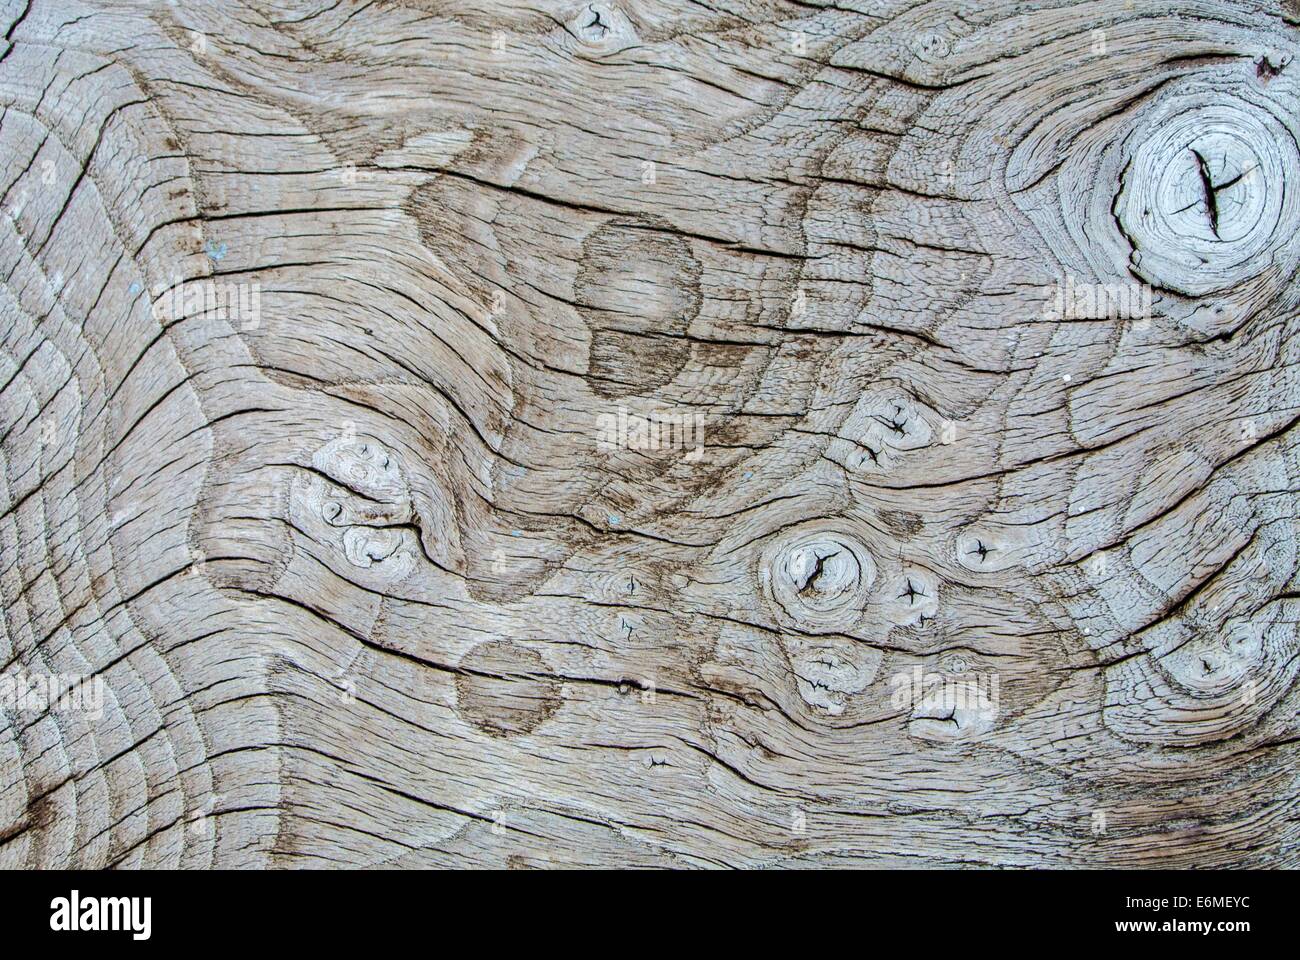 Dry and cracked wood surface, Stock Photo